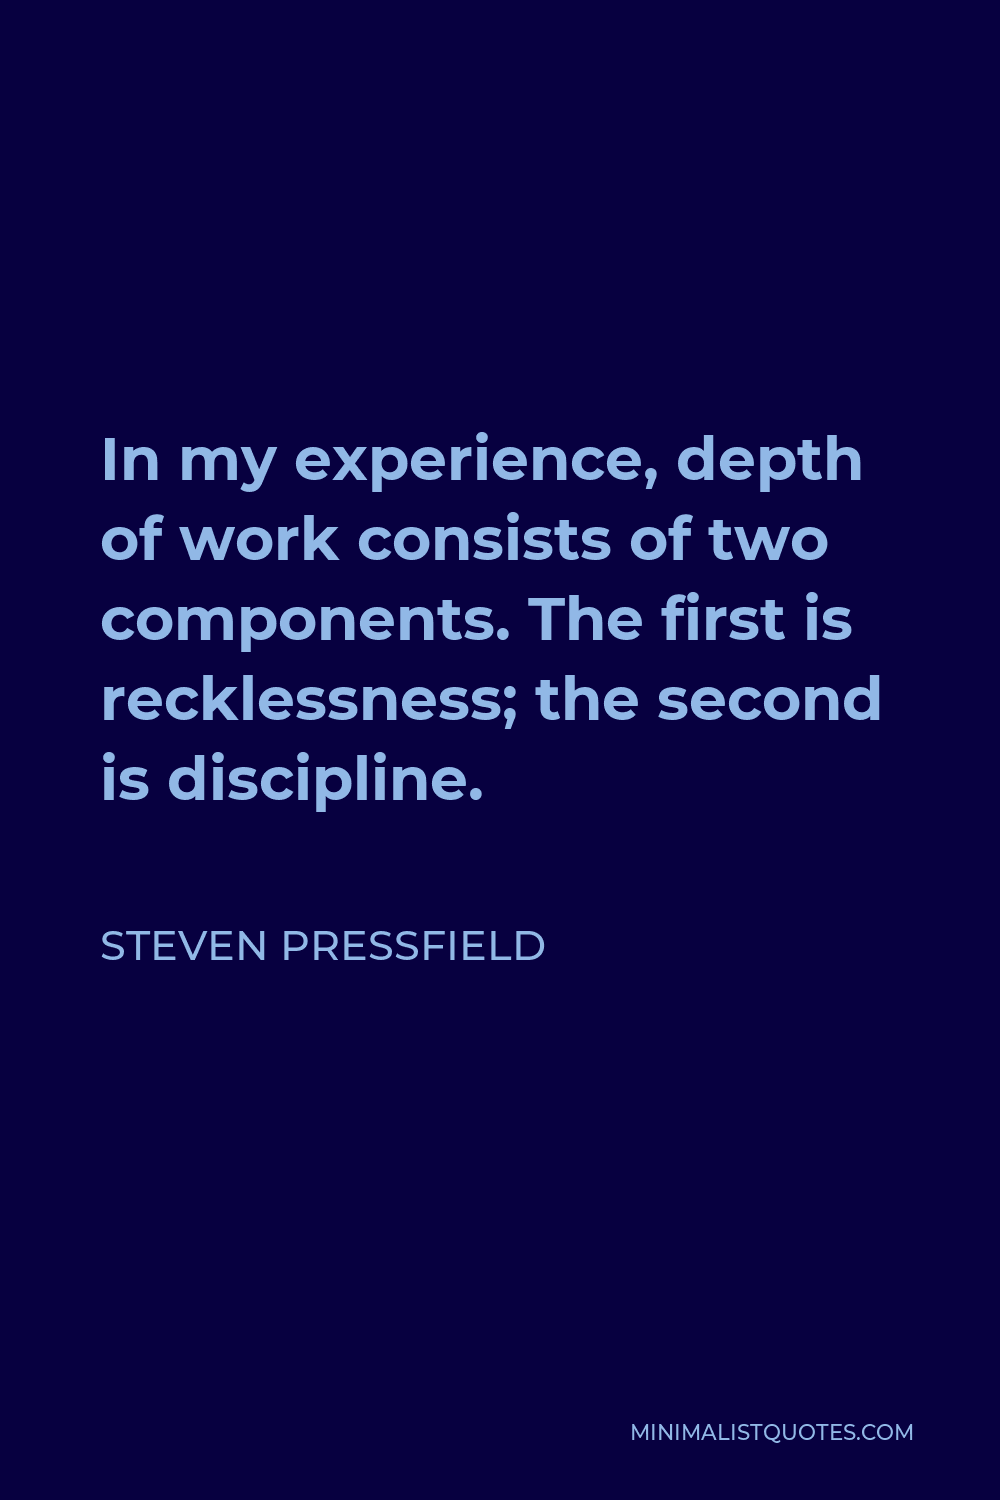 Steven Pressfield Quote - In my experience, depth of work consists of two components. The first is recklessness; the second is discipline.